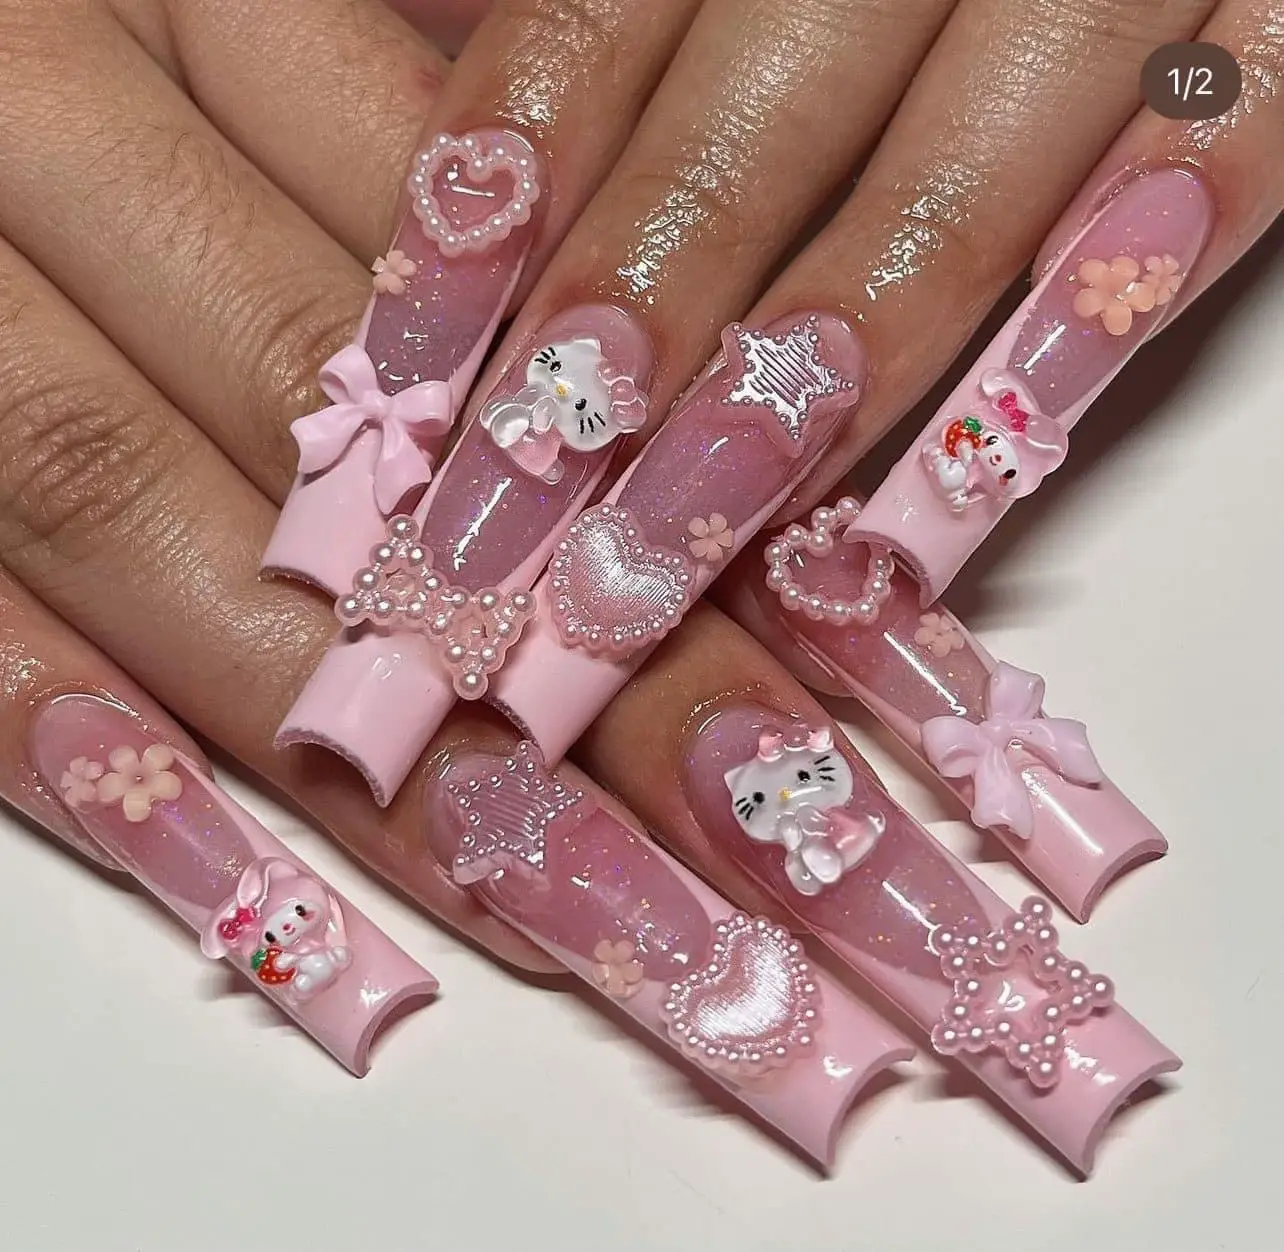 HOW TO DIY PRESS ON NAILS Old School Kawaii Aesthetic 3D CABOCHON Charms  Hello kitty 